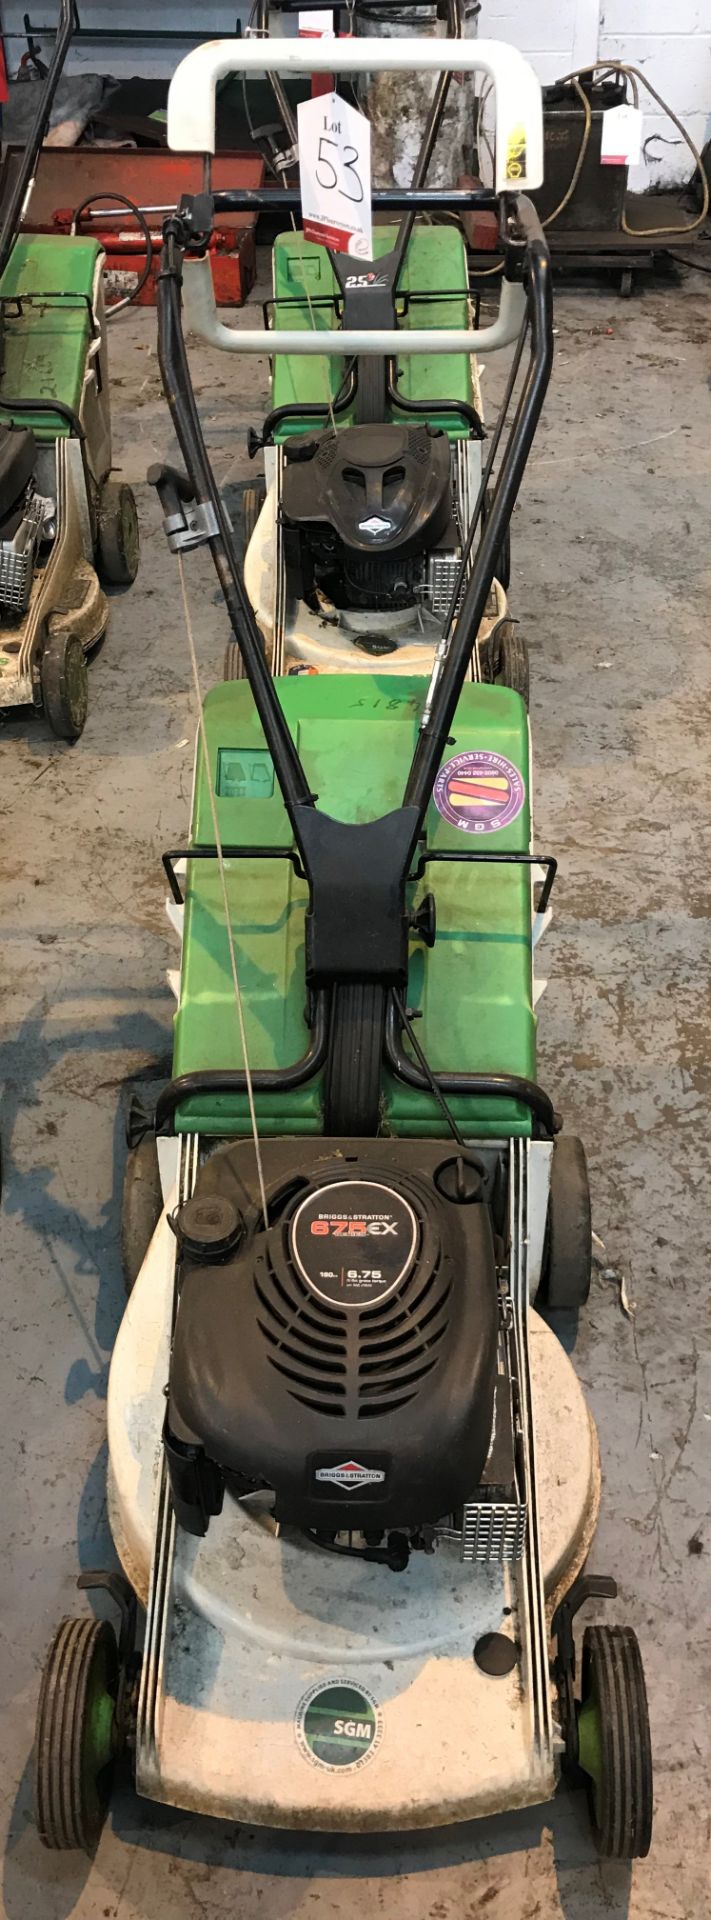 Etesia PBTS Self Propelled Commercial Lawn Mower